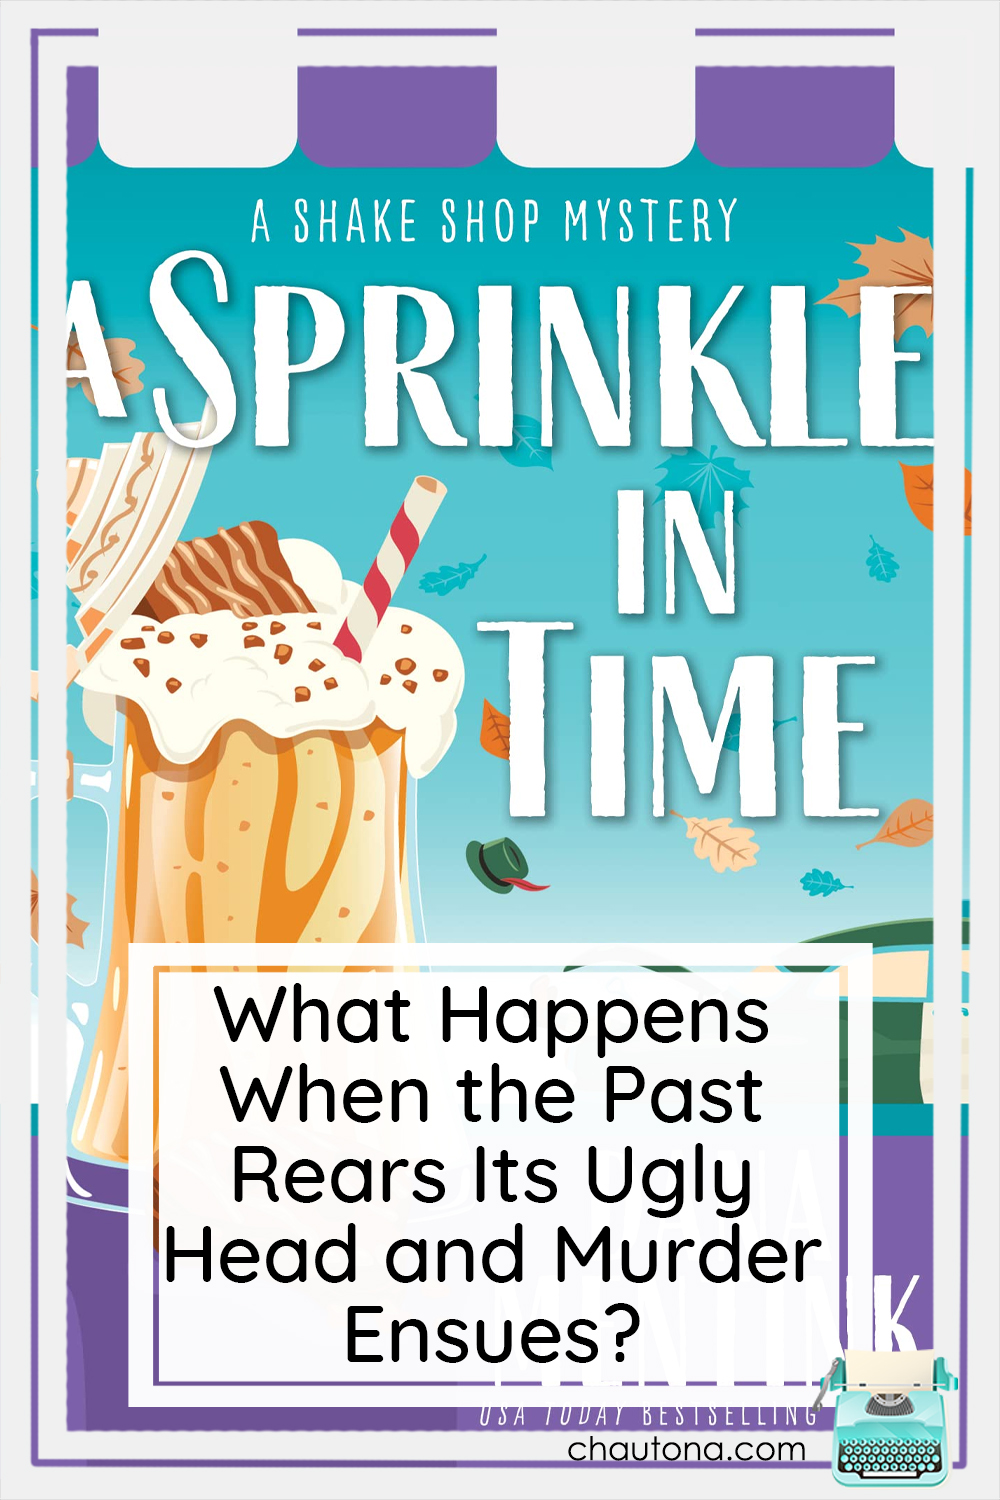 Sprinkled in Time by Dana Mentink is due to release on Tuesday, and guys! You've got to read this book if you love cozy mysteries! via @chautonahavig